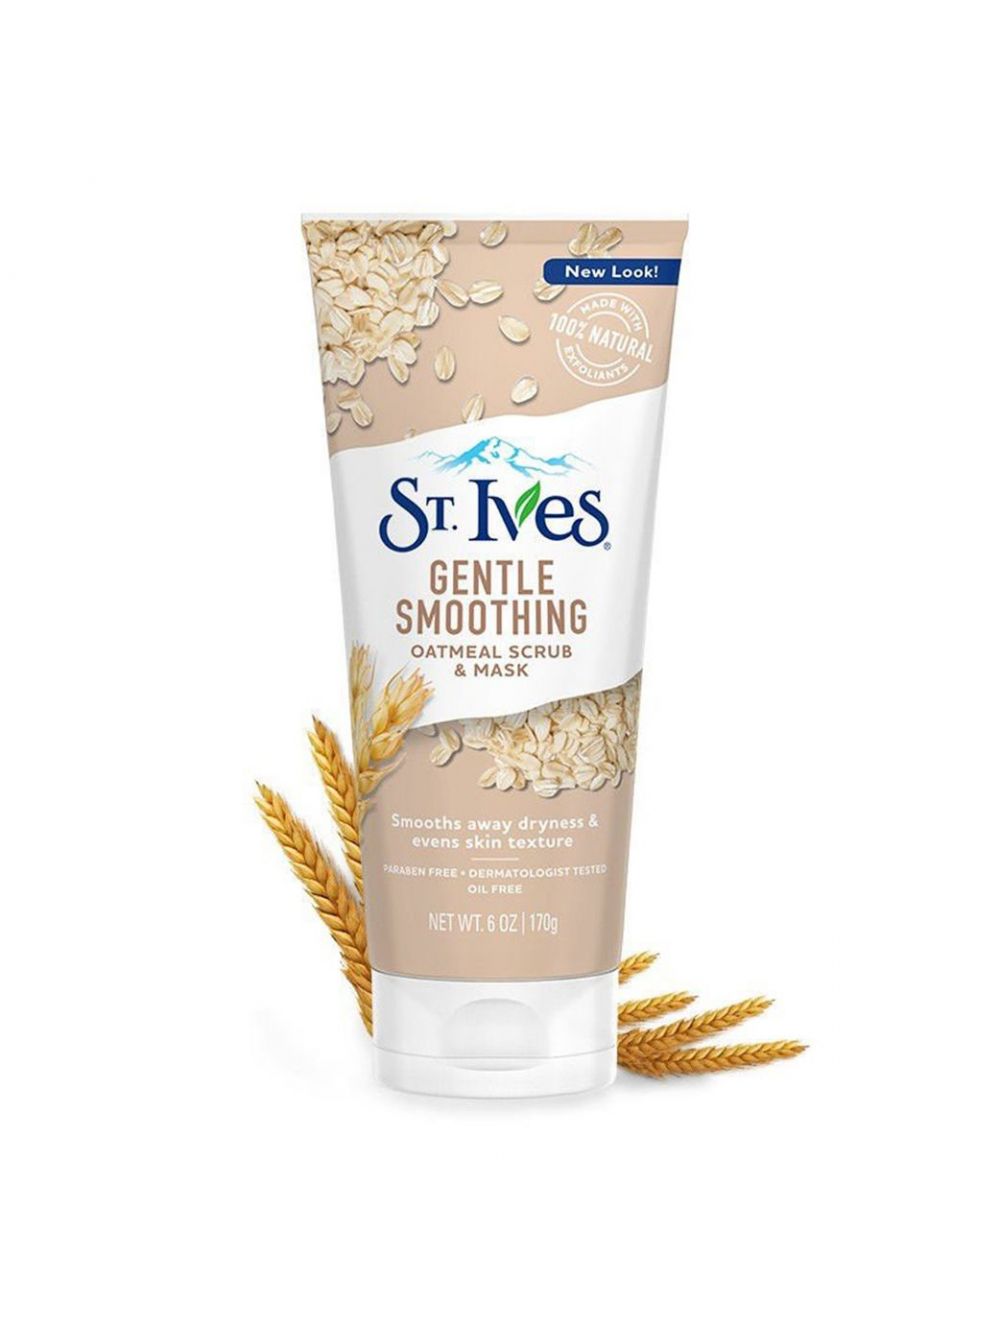 St. Ives Gentle Smoothing Oatmeal Scrub & Mask (170gm)